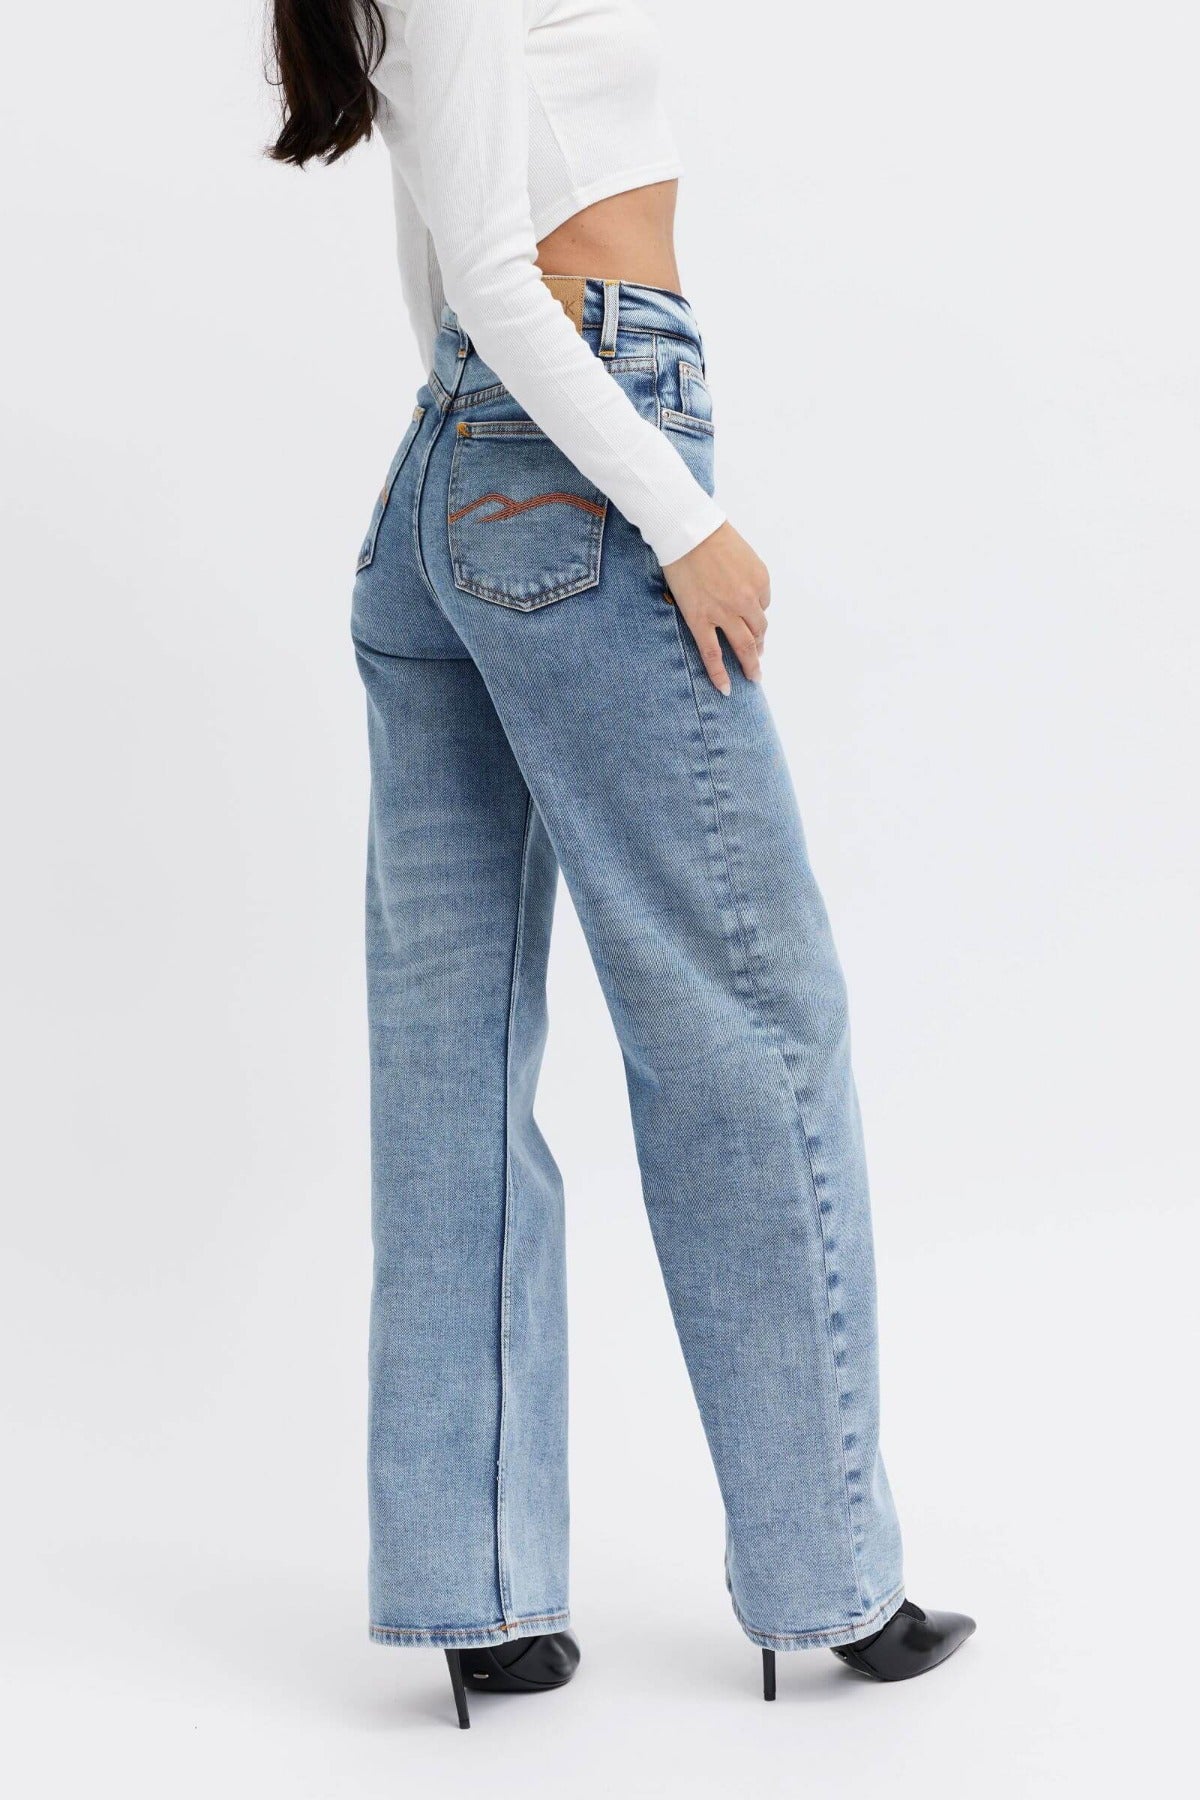 Lease Jeans - Ethical Denim by Organsk